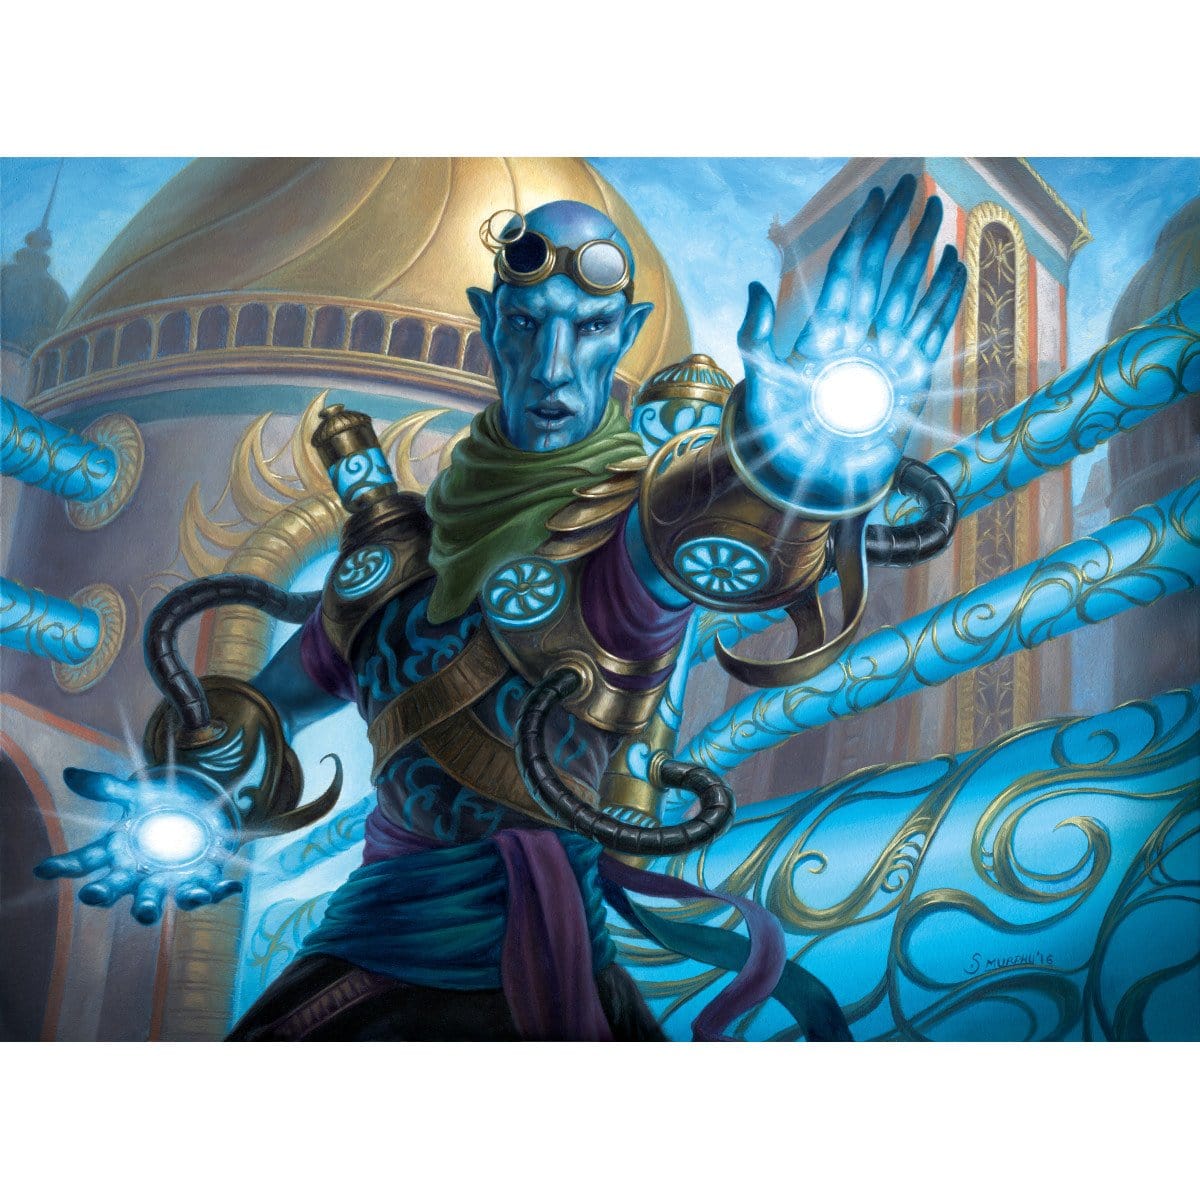 Dispersal Technician Print - Print - Original Magic Art - Accessories for Magic the Gathering and other card games